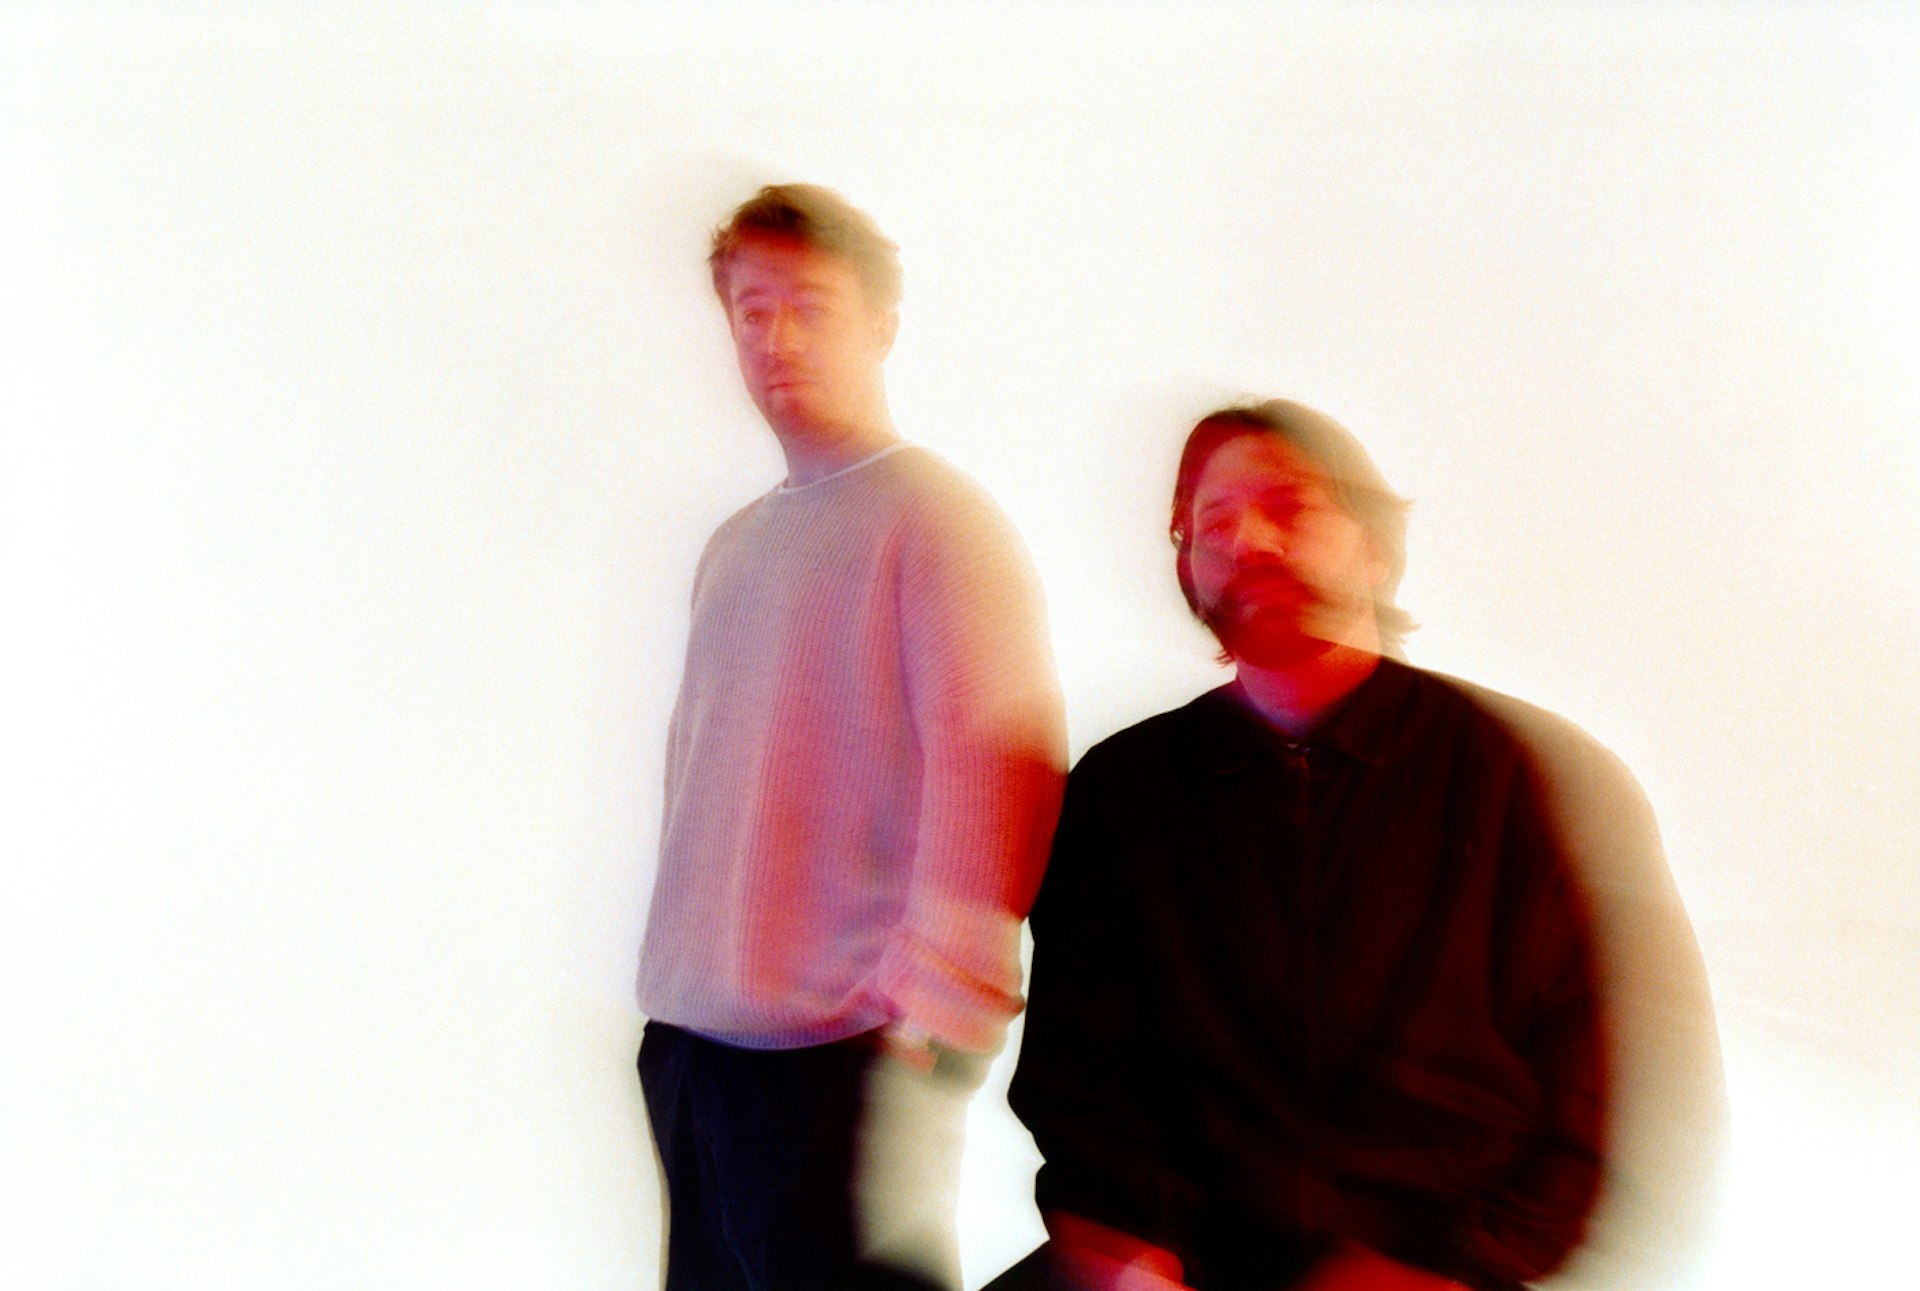 Mount Kimbie are forging a new musical identity